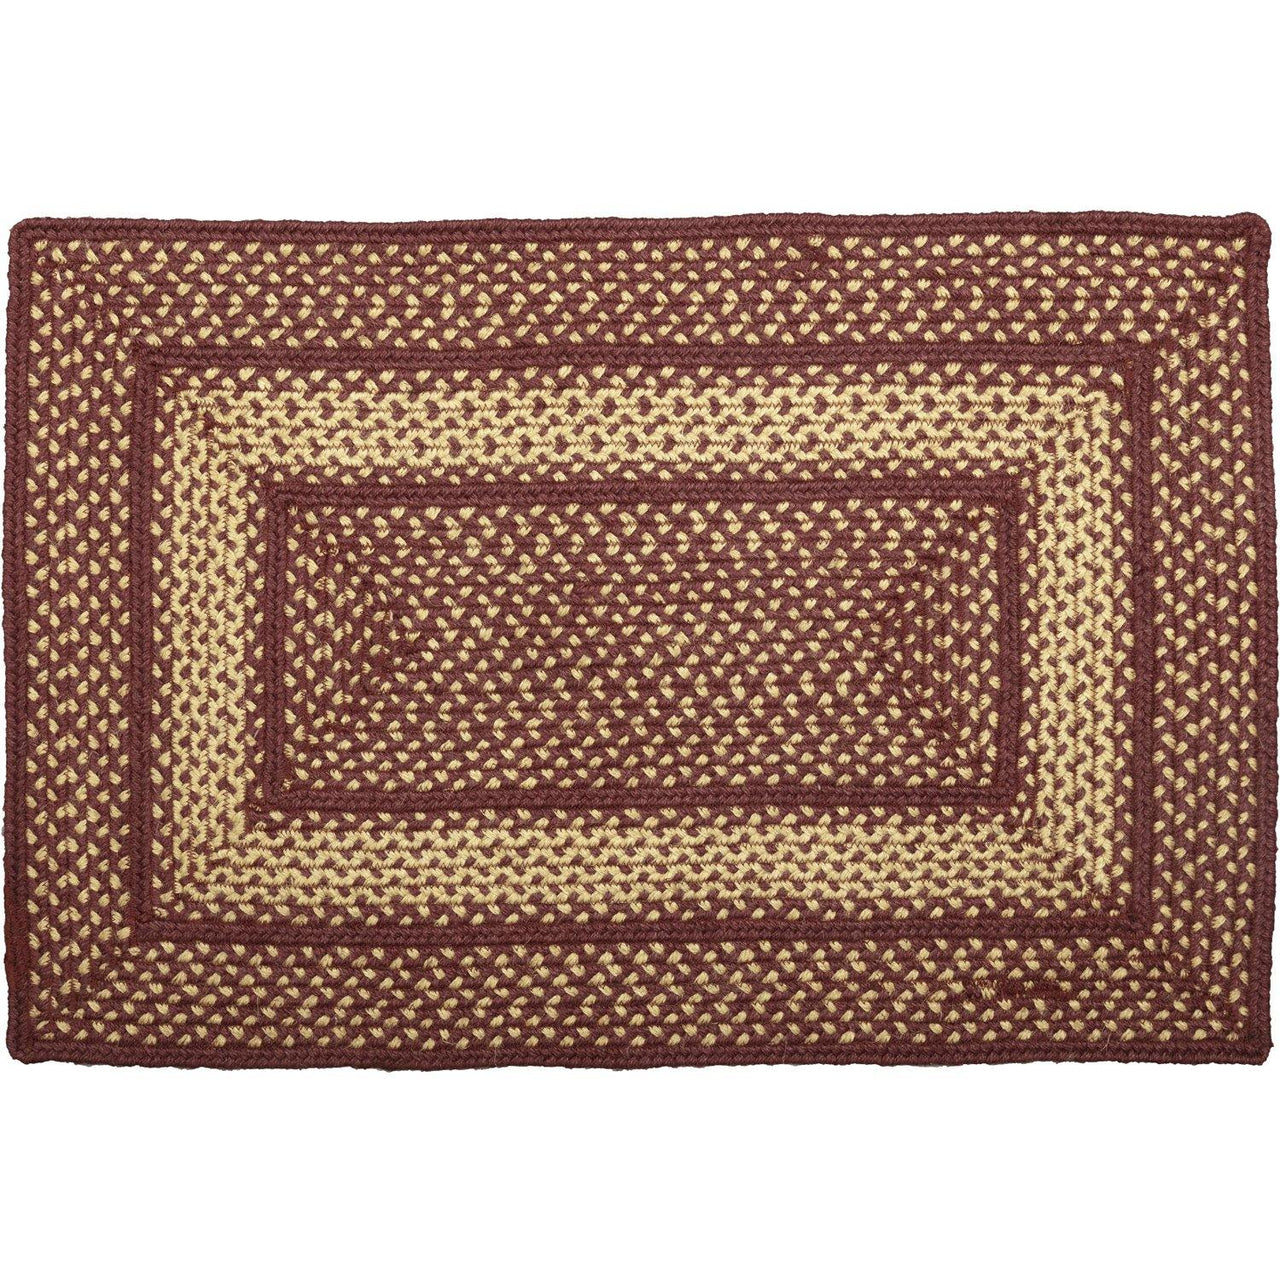 Burgundy Red Primitive Jute Braided Rug Rect 20"x30" with Rug Pad VHC Brands - The Fox Decor